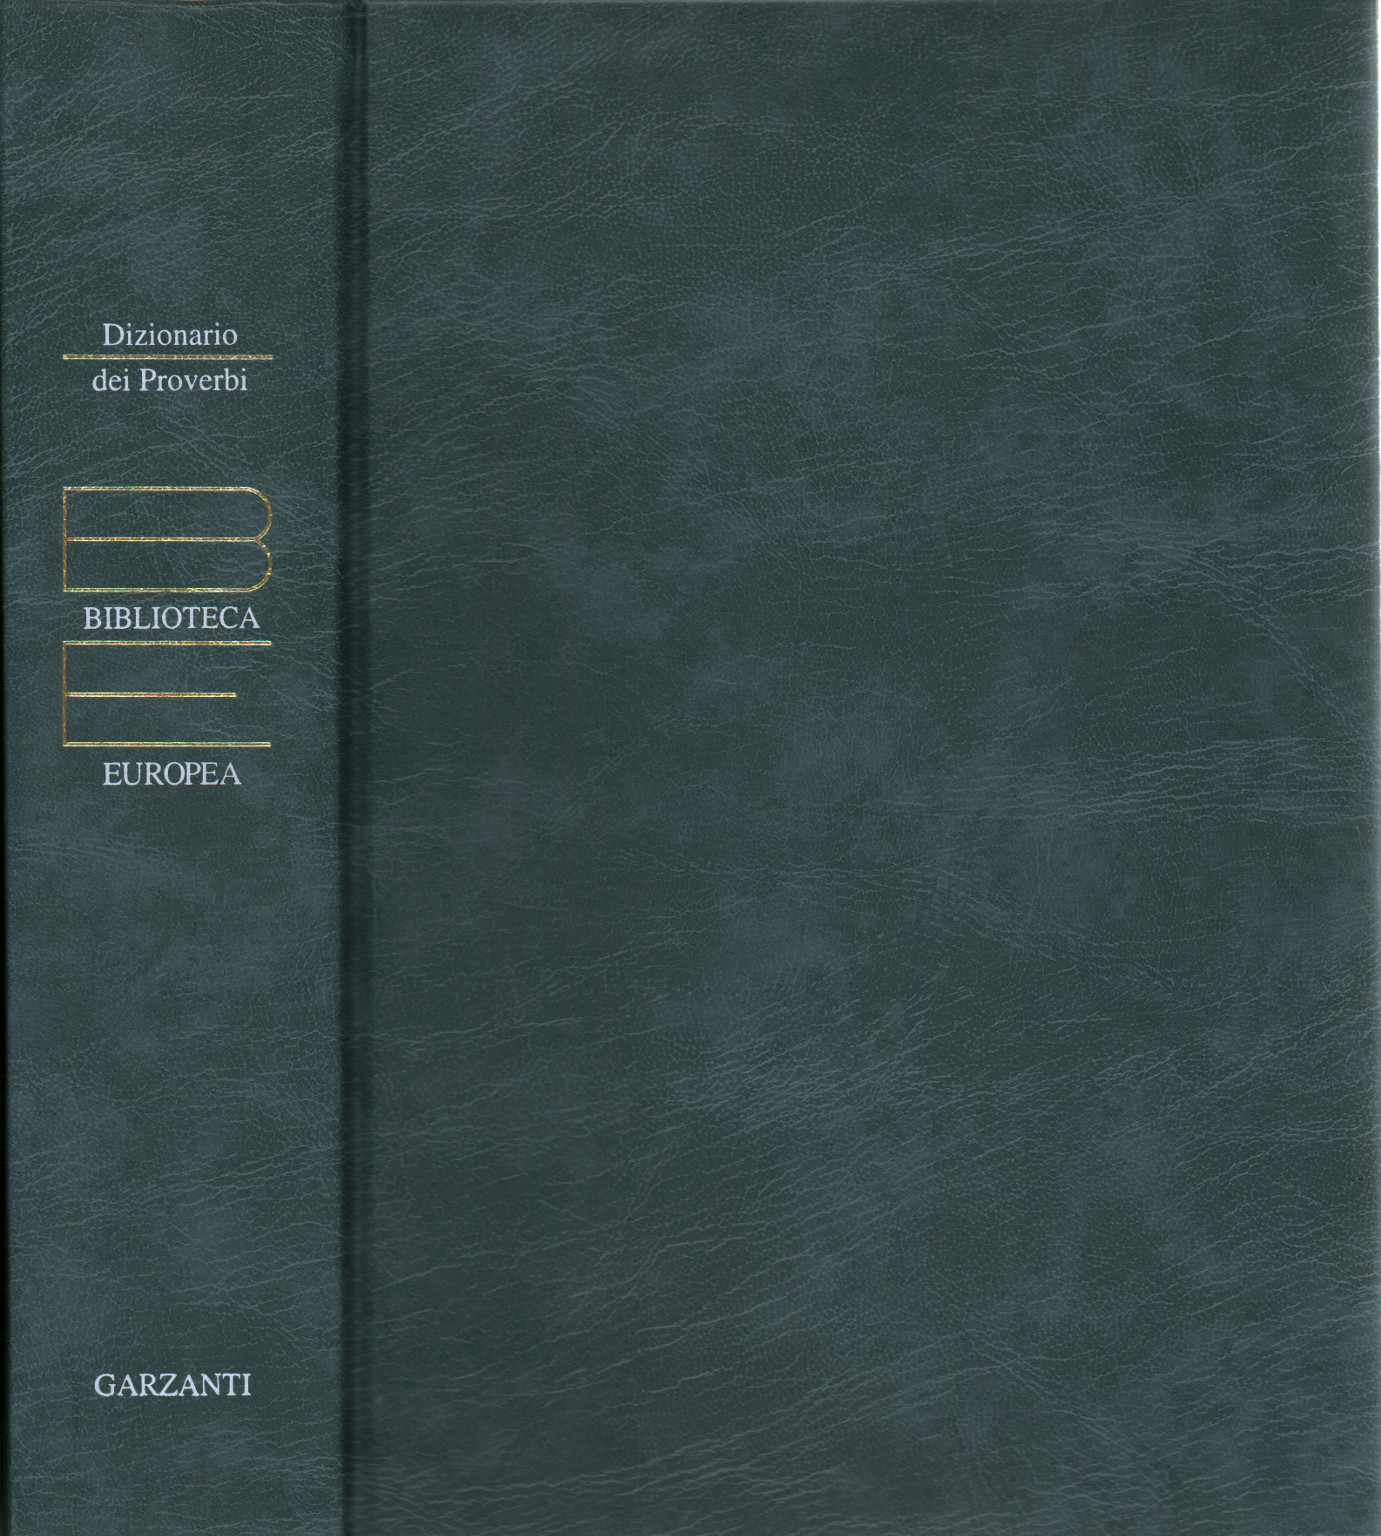 Dictionary of proverbs. The proverbs of the Italian organ-s.a.